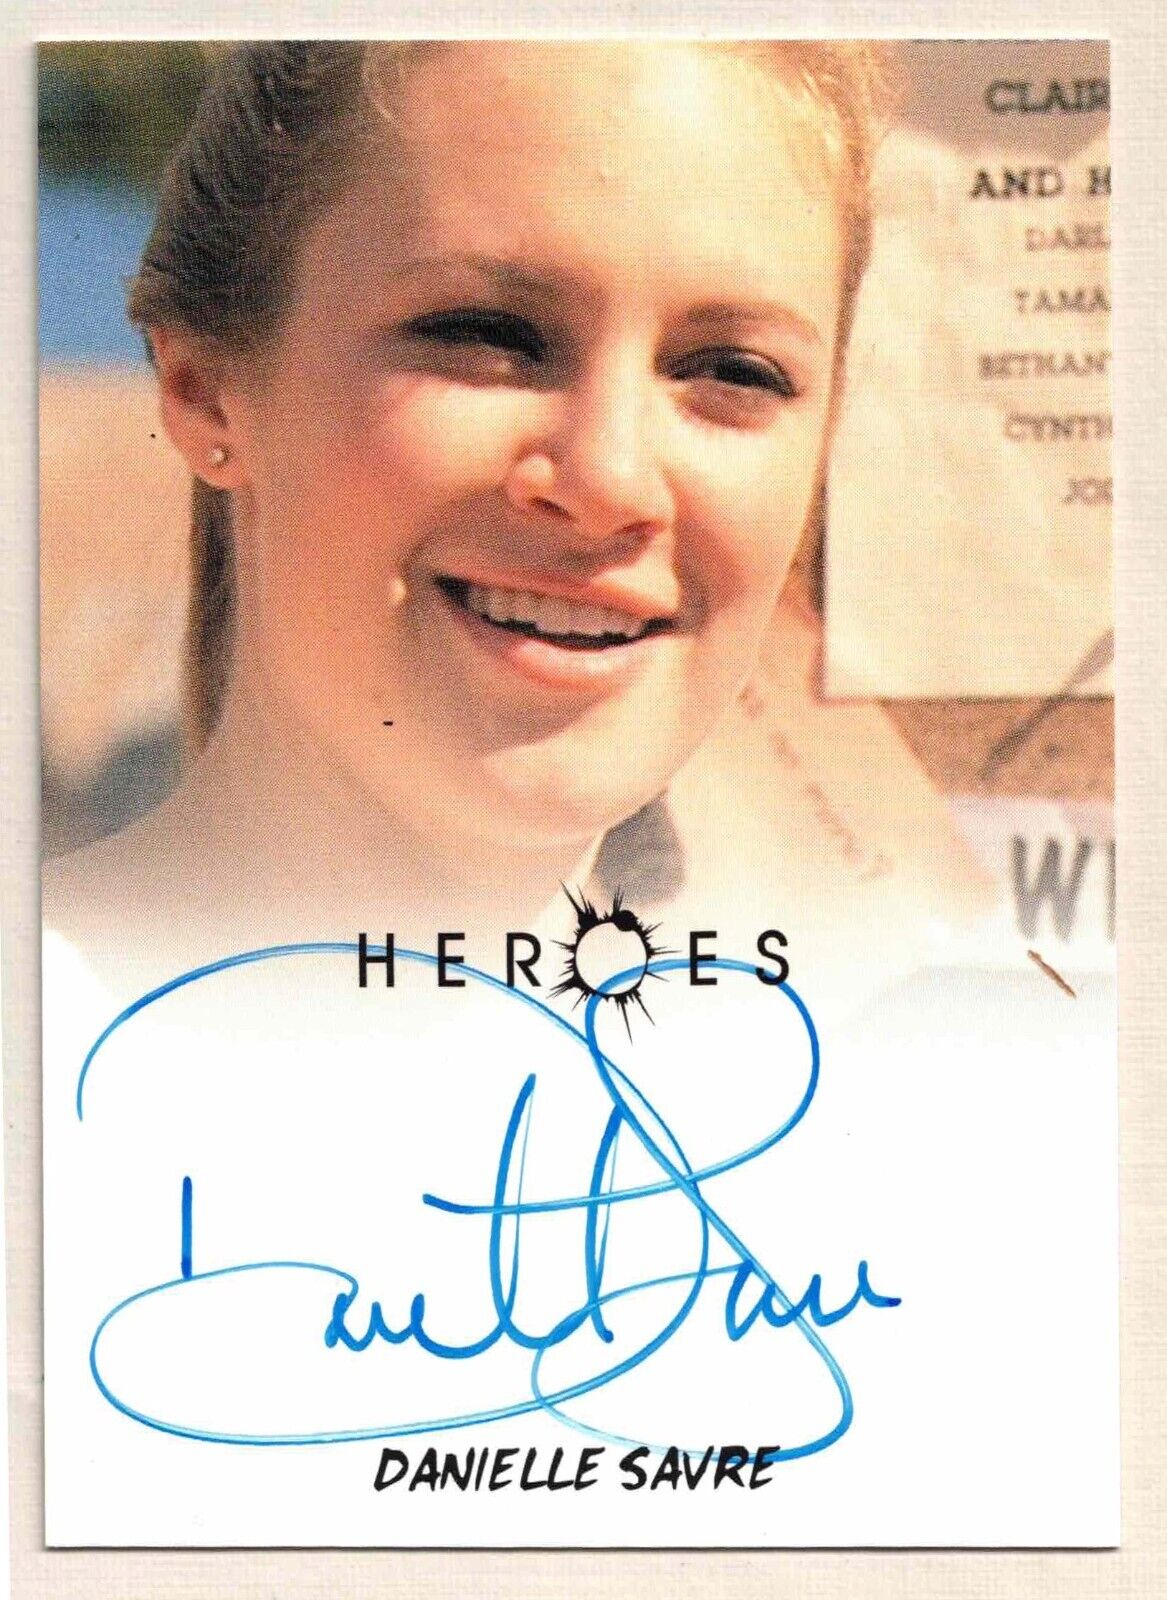 *Heroes Archives: Autograph Card of Danielle Savre as Jackie Wilcox